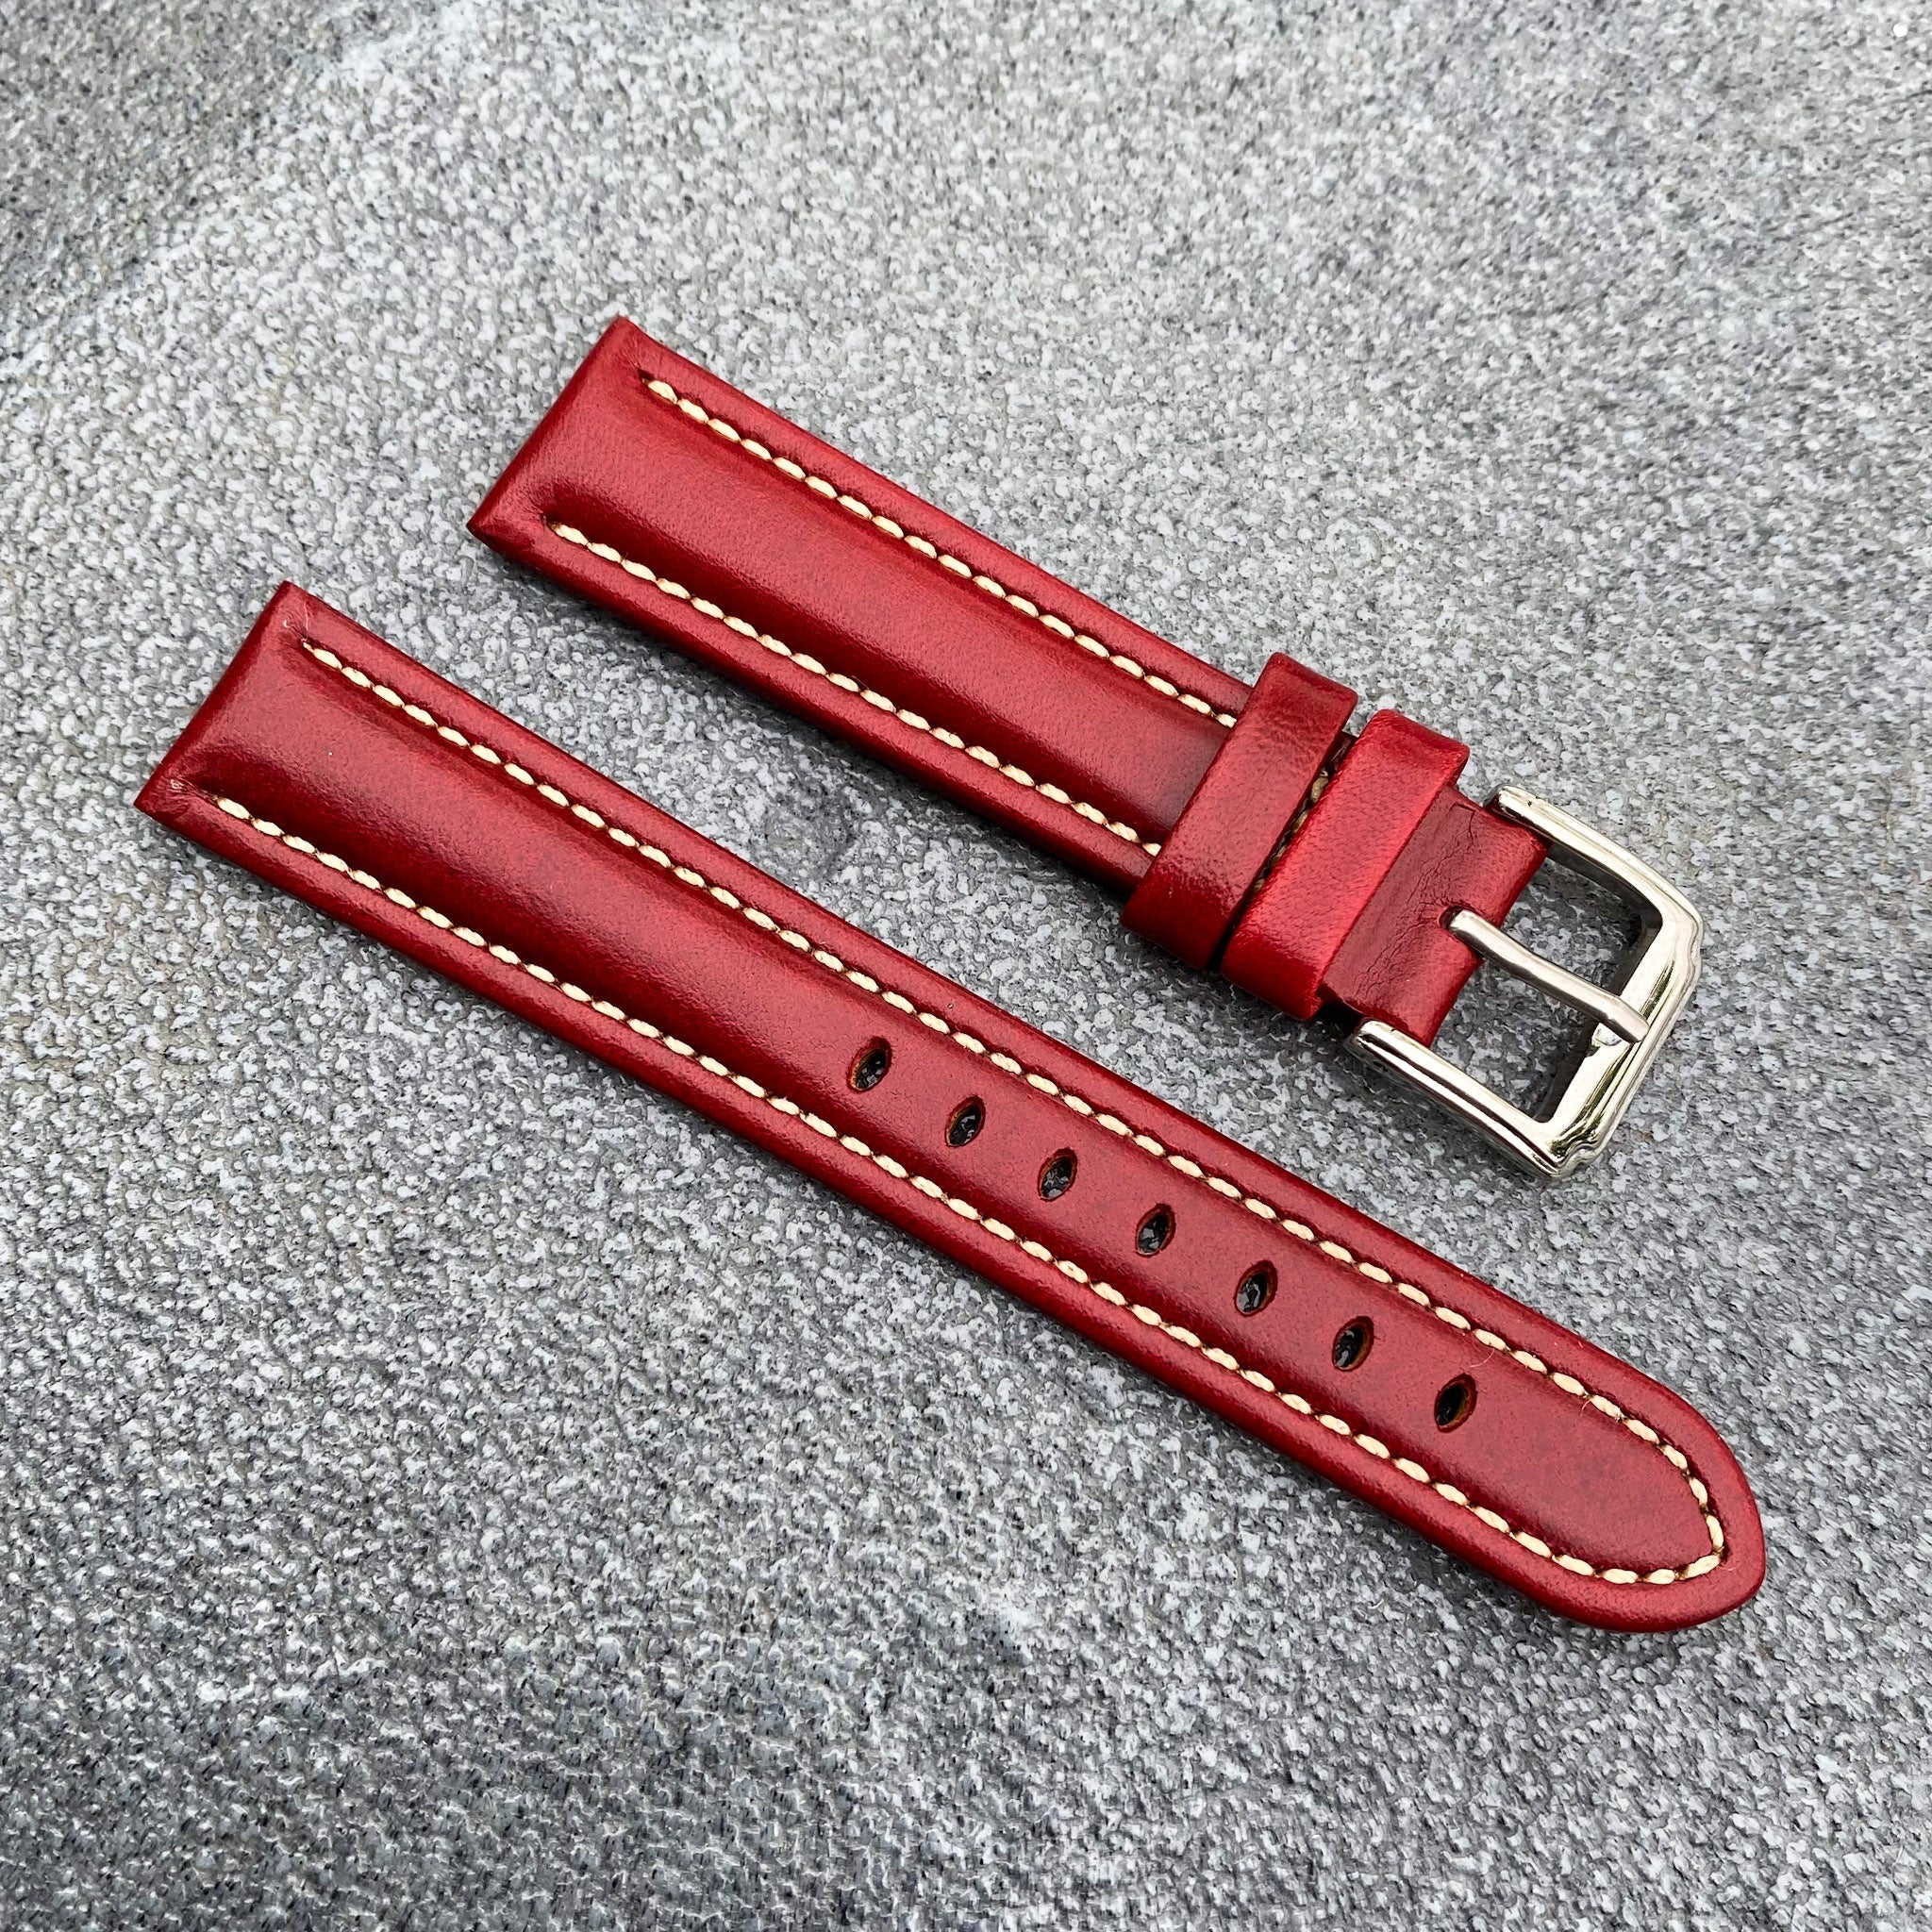 (Kyoto Series) 18mm/20mm/22mm Red Handcraft French Calfskin Leather Watch Strap w/White Stitching - Samurai Vintage Co.